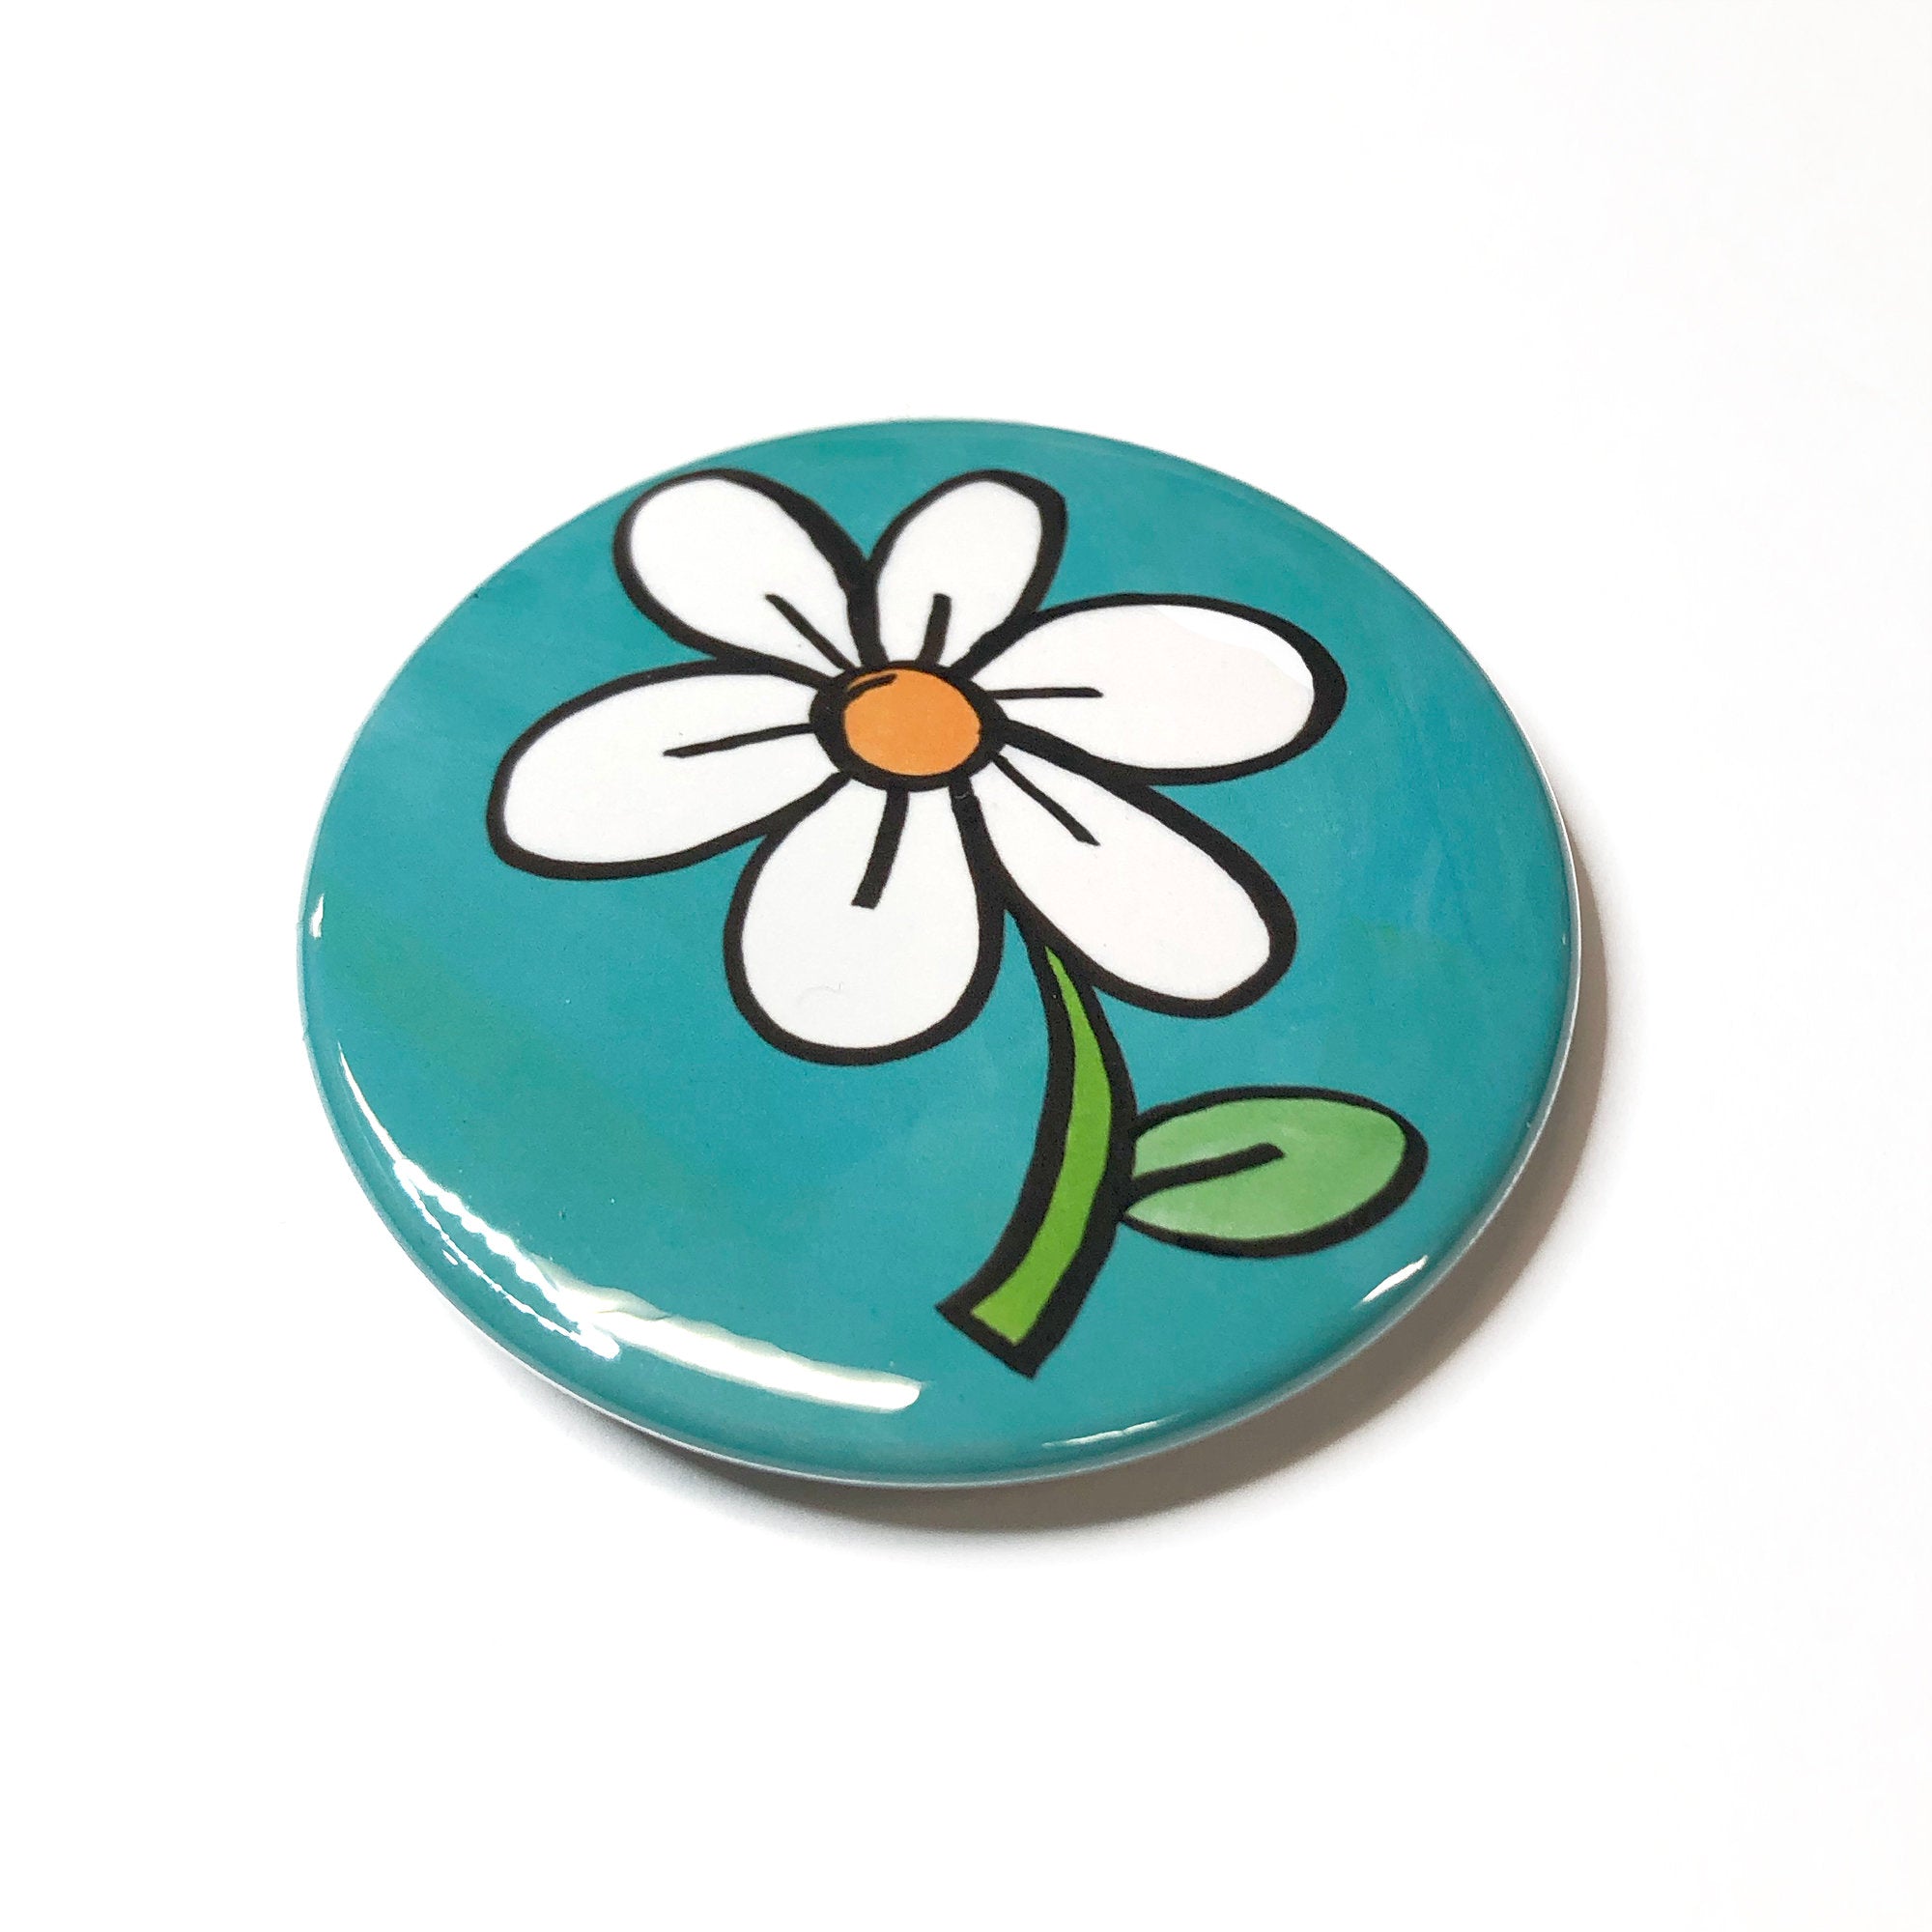 Cute Daisy Magnet, Pin Back Button, or Pocket Mirror - 1 inch, 1 1/4 inch, 2 1/4 inch - White Flower Fridge Magnet, Pinback Button